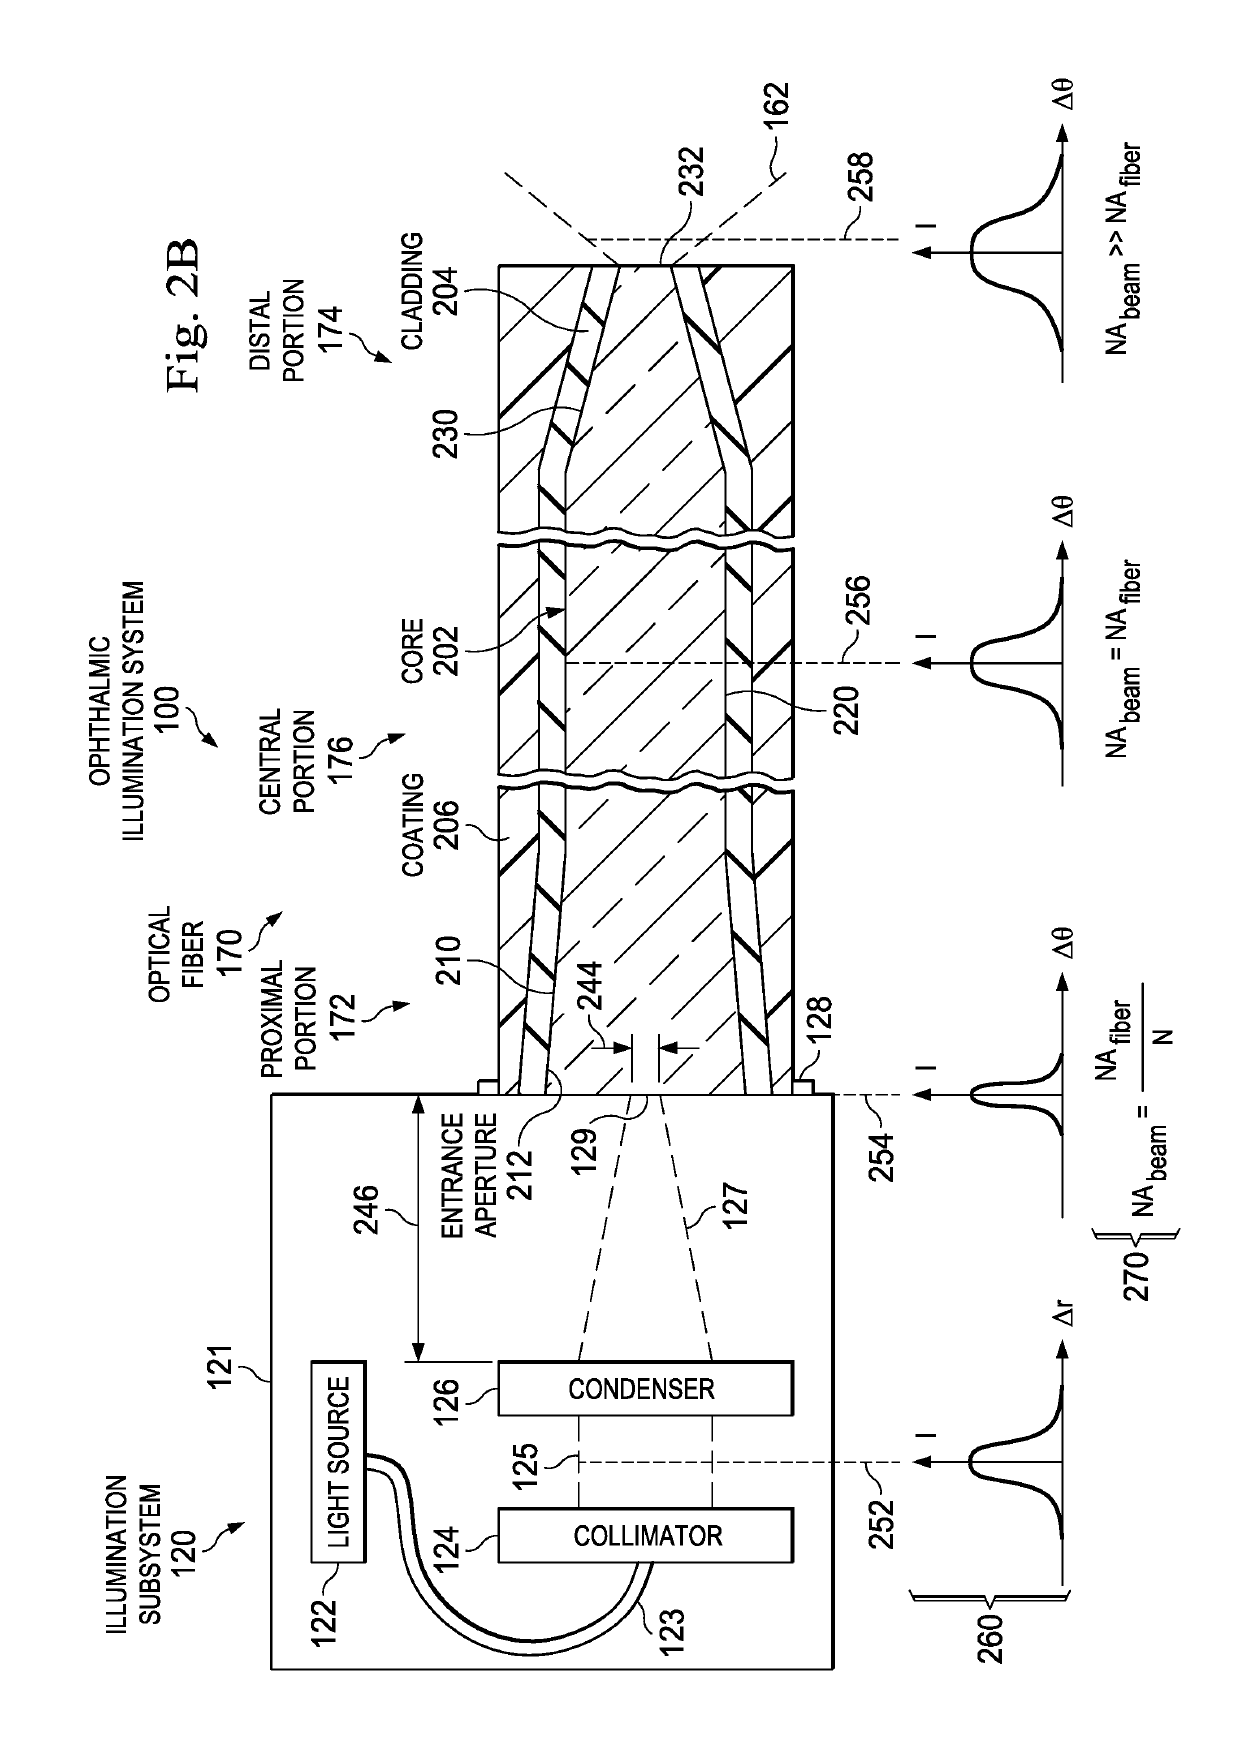 Optical fiber having proximal taper for ophthalmic surgical illumination